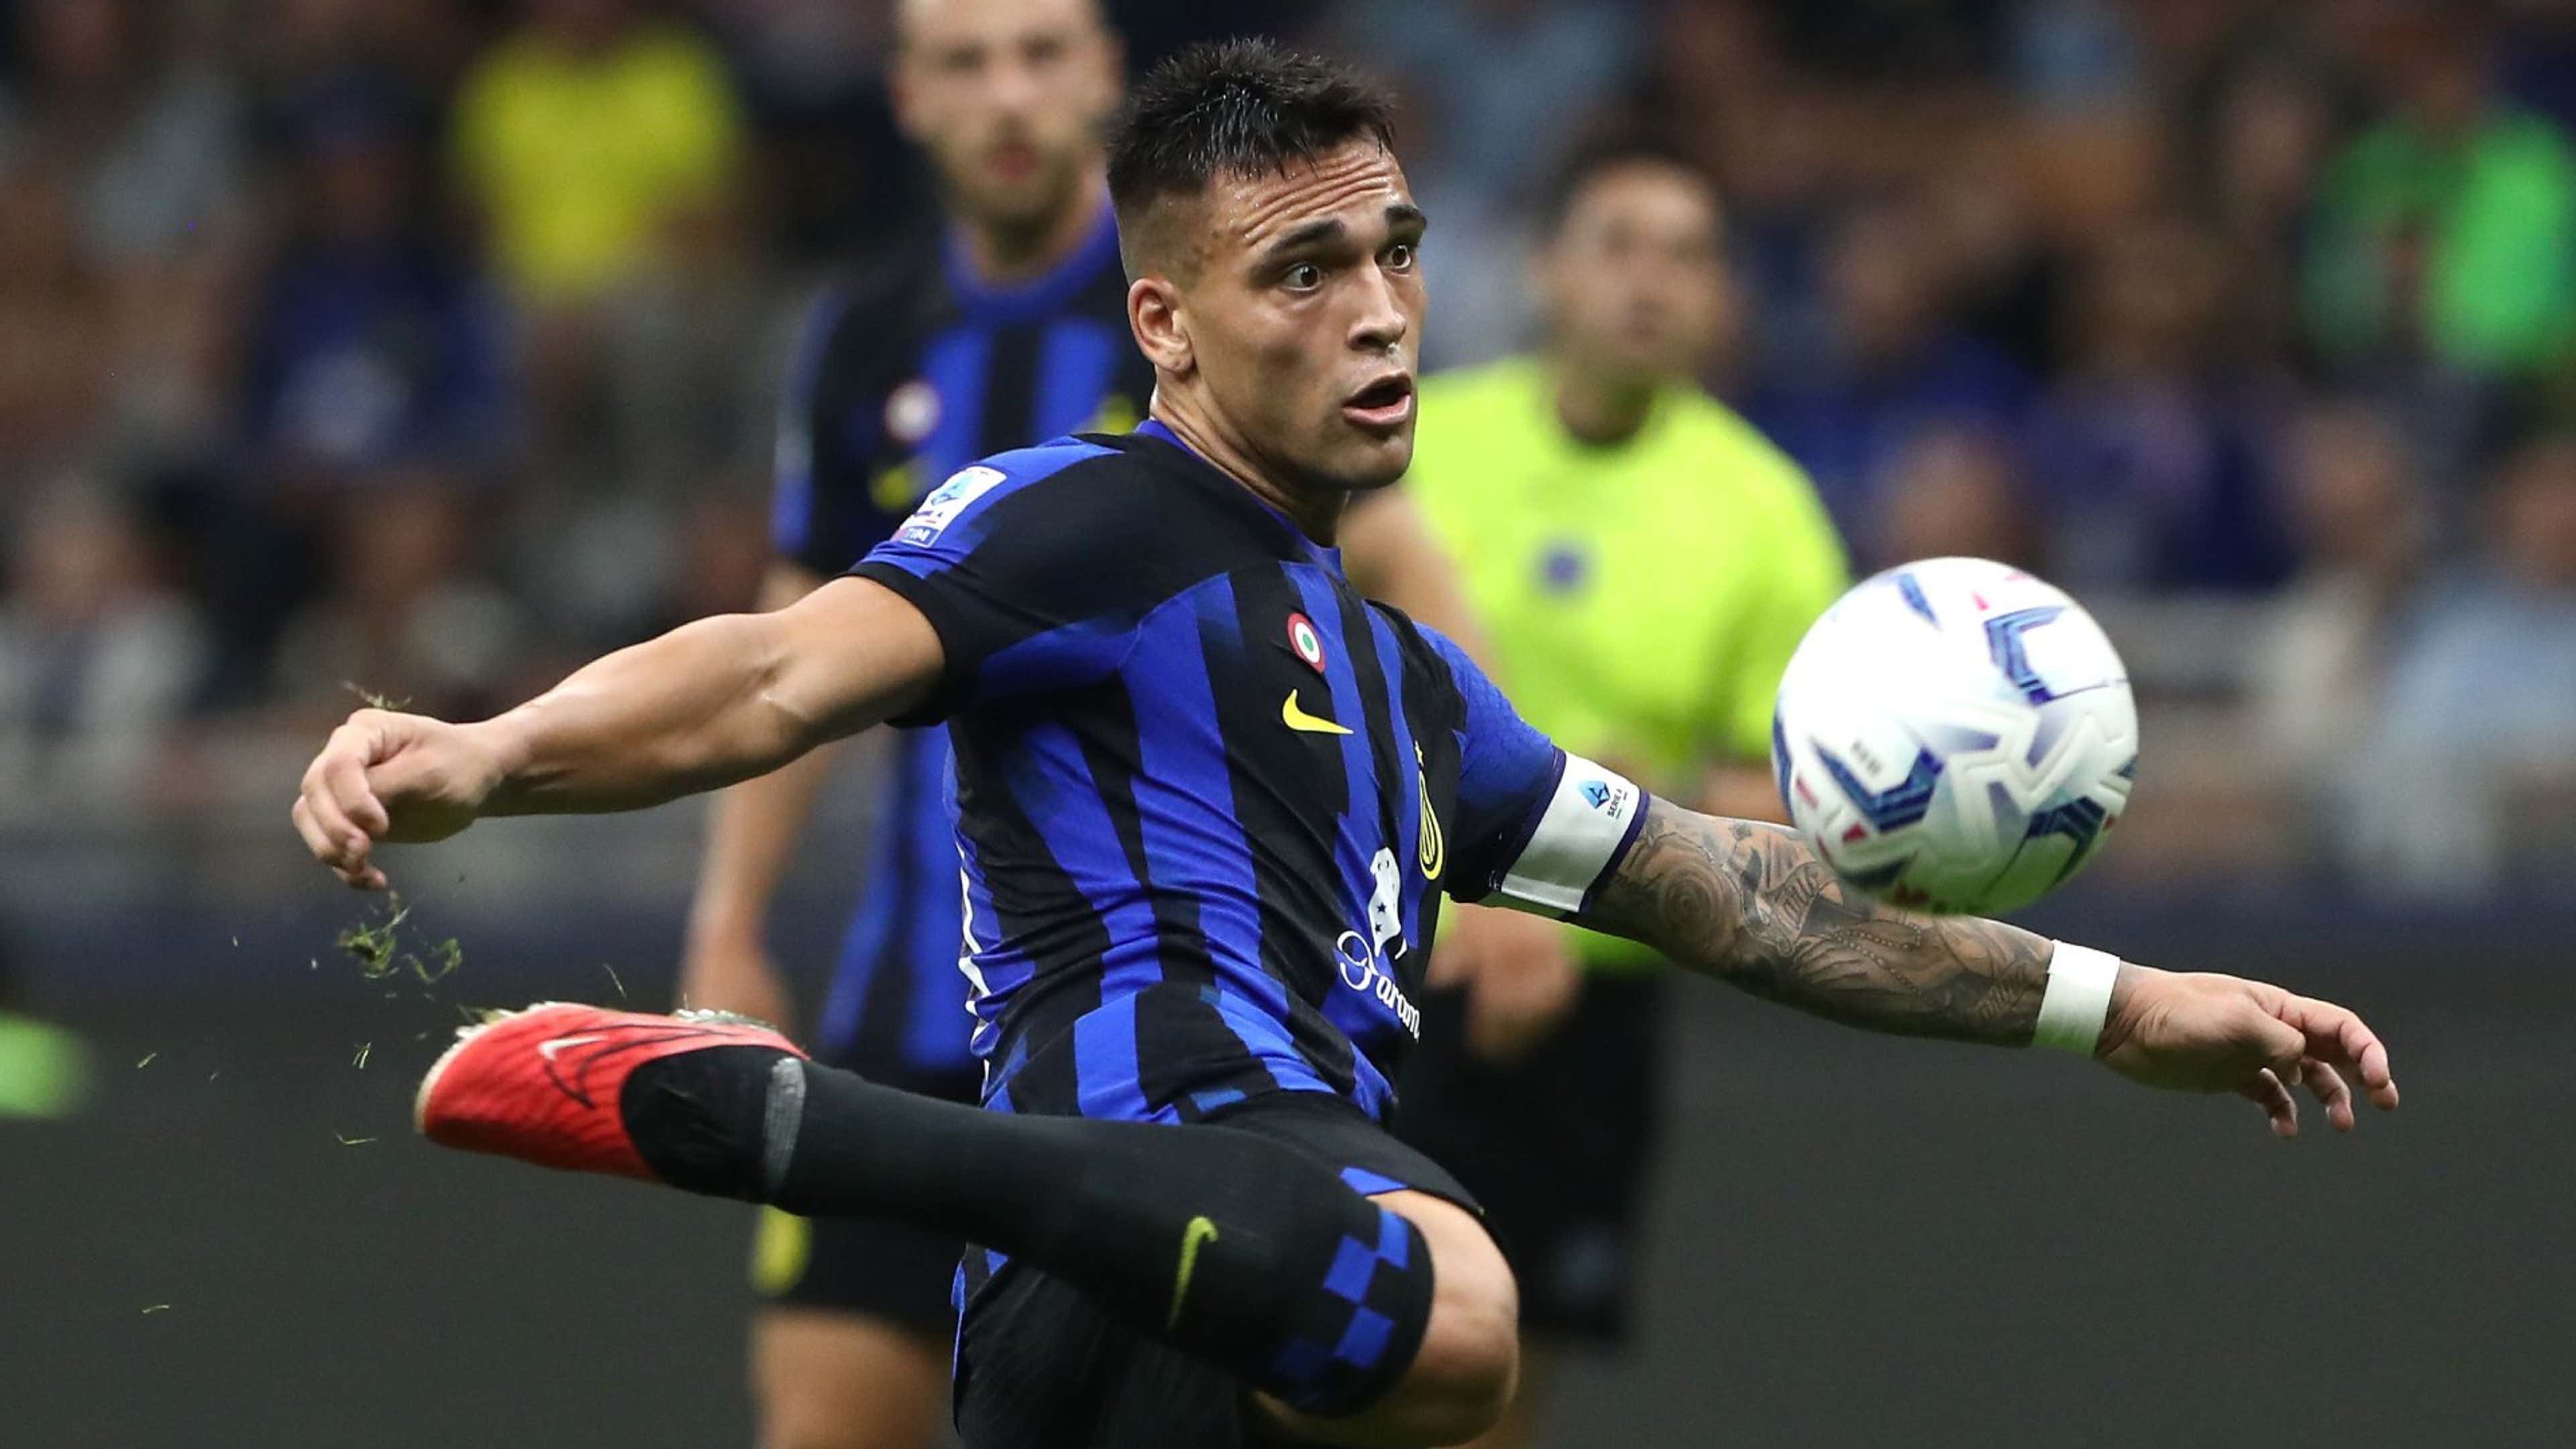 He only thinks about Inter' - Lautaro Martinez's agent confirms striker  rejected 'many' offers and is in talks over new contract at Serie A giants  | Goal.com